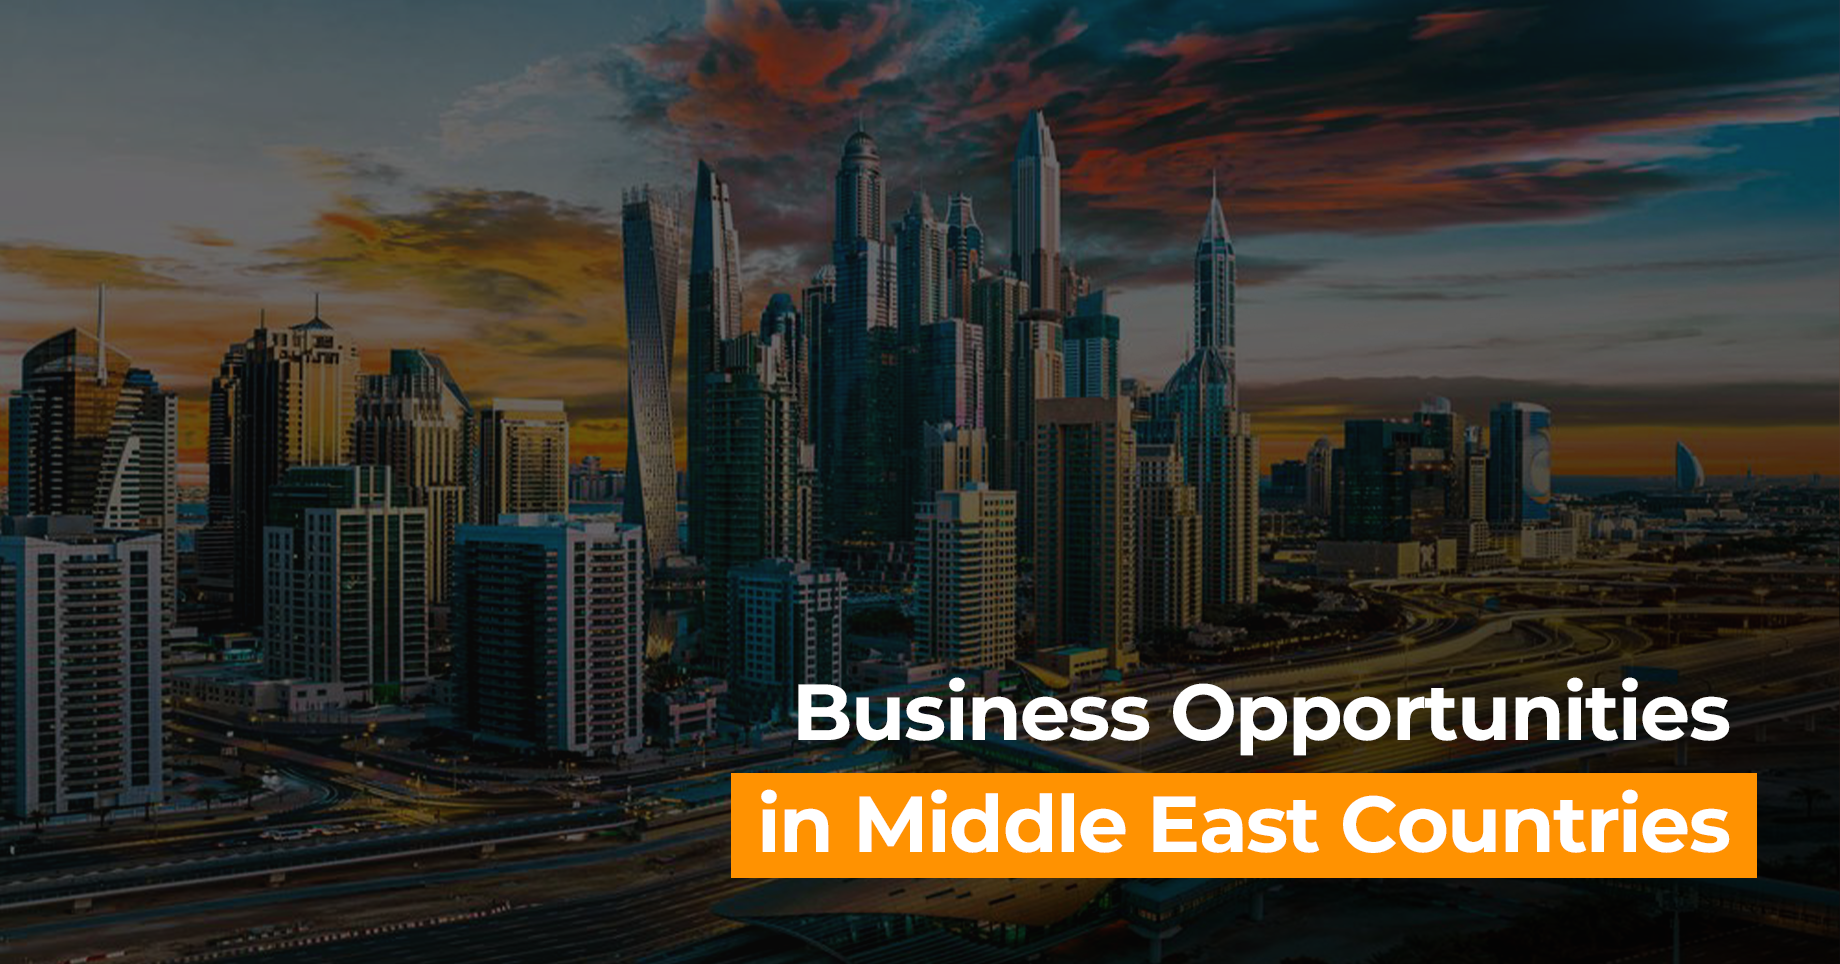 Business Opportunities in Middle East Countries